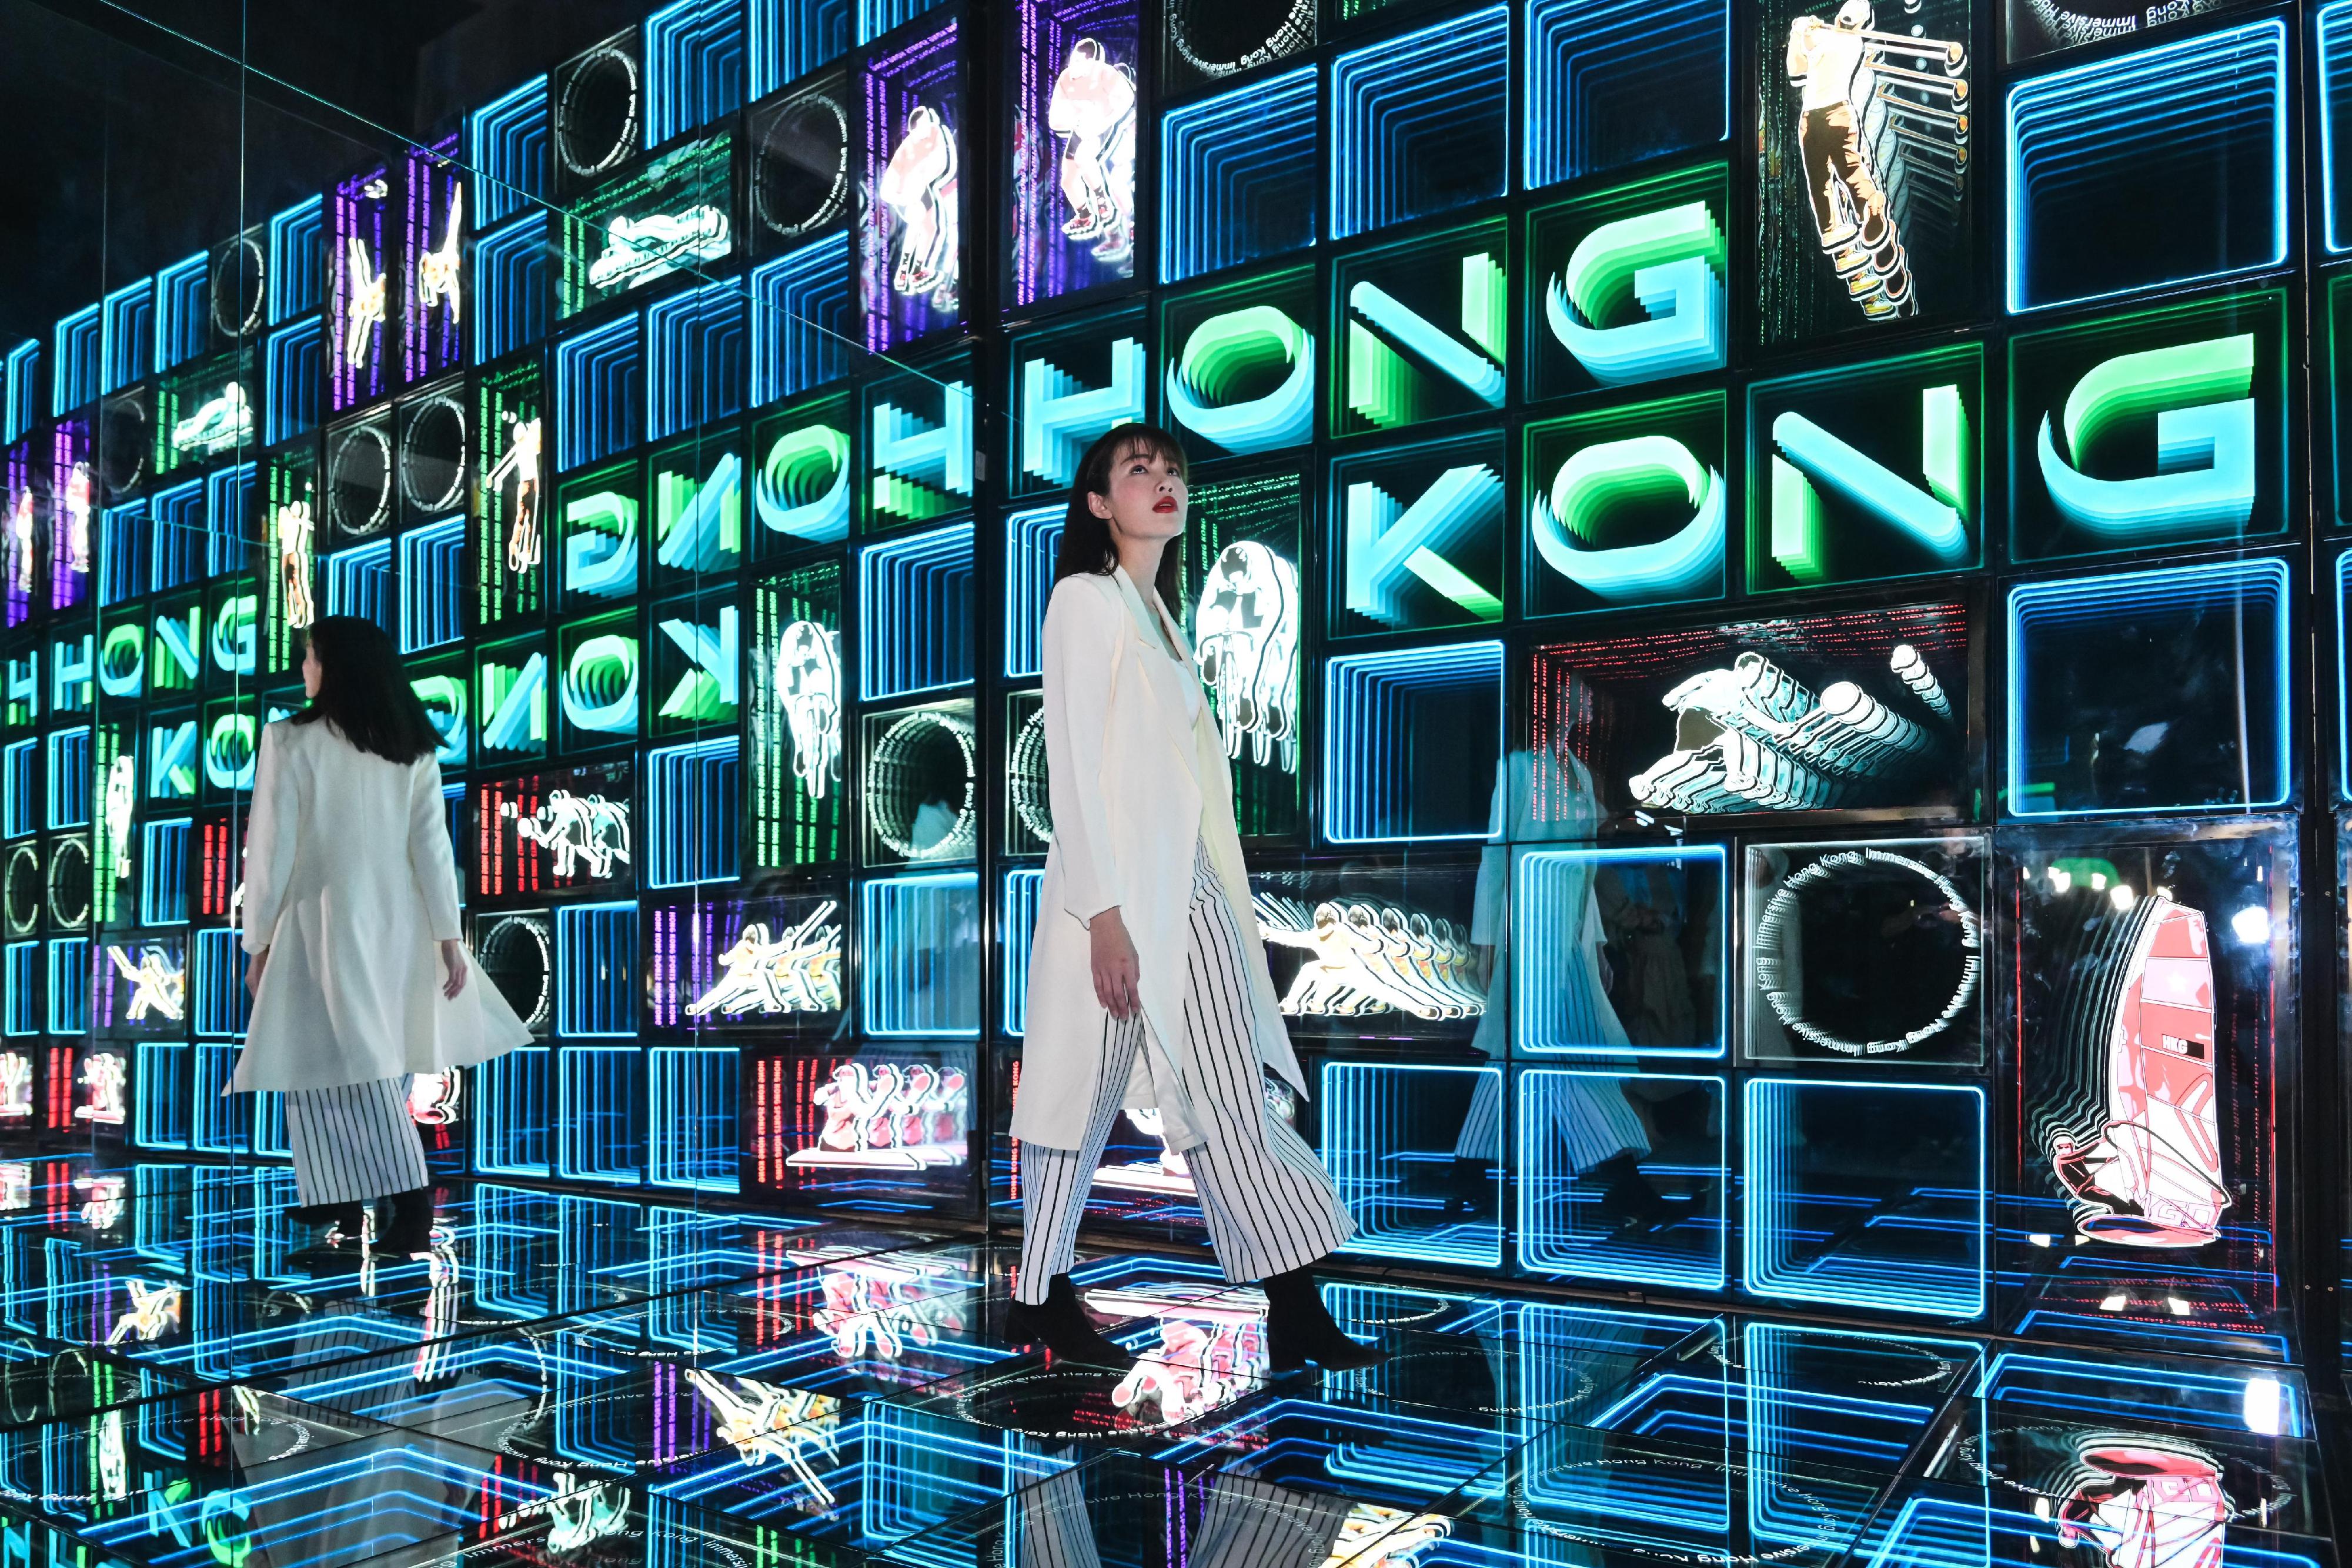 The "Immersive Hong Kong" roving exhibition, which showcases Hong Kong's unique strengths, advantages and opportunities with art technology, was launched in Kuala Lumpur, Malaysia, today (March 3) as part of a promotional campaign in Association of Southeast Asian Nations countries. Photo shows the light box installations with the theme of "Buzzing Sports Action" at the exhibition.